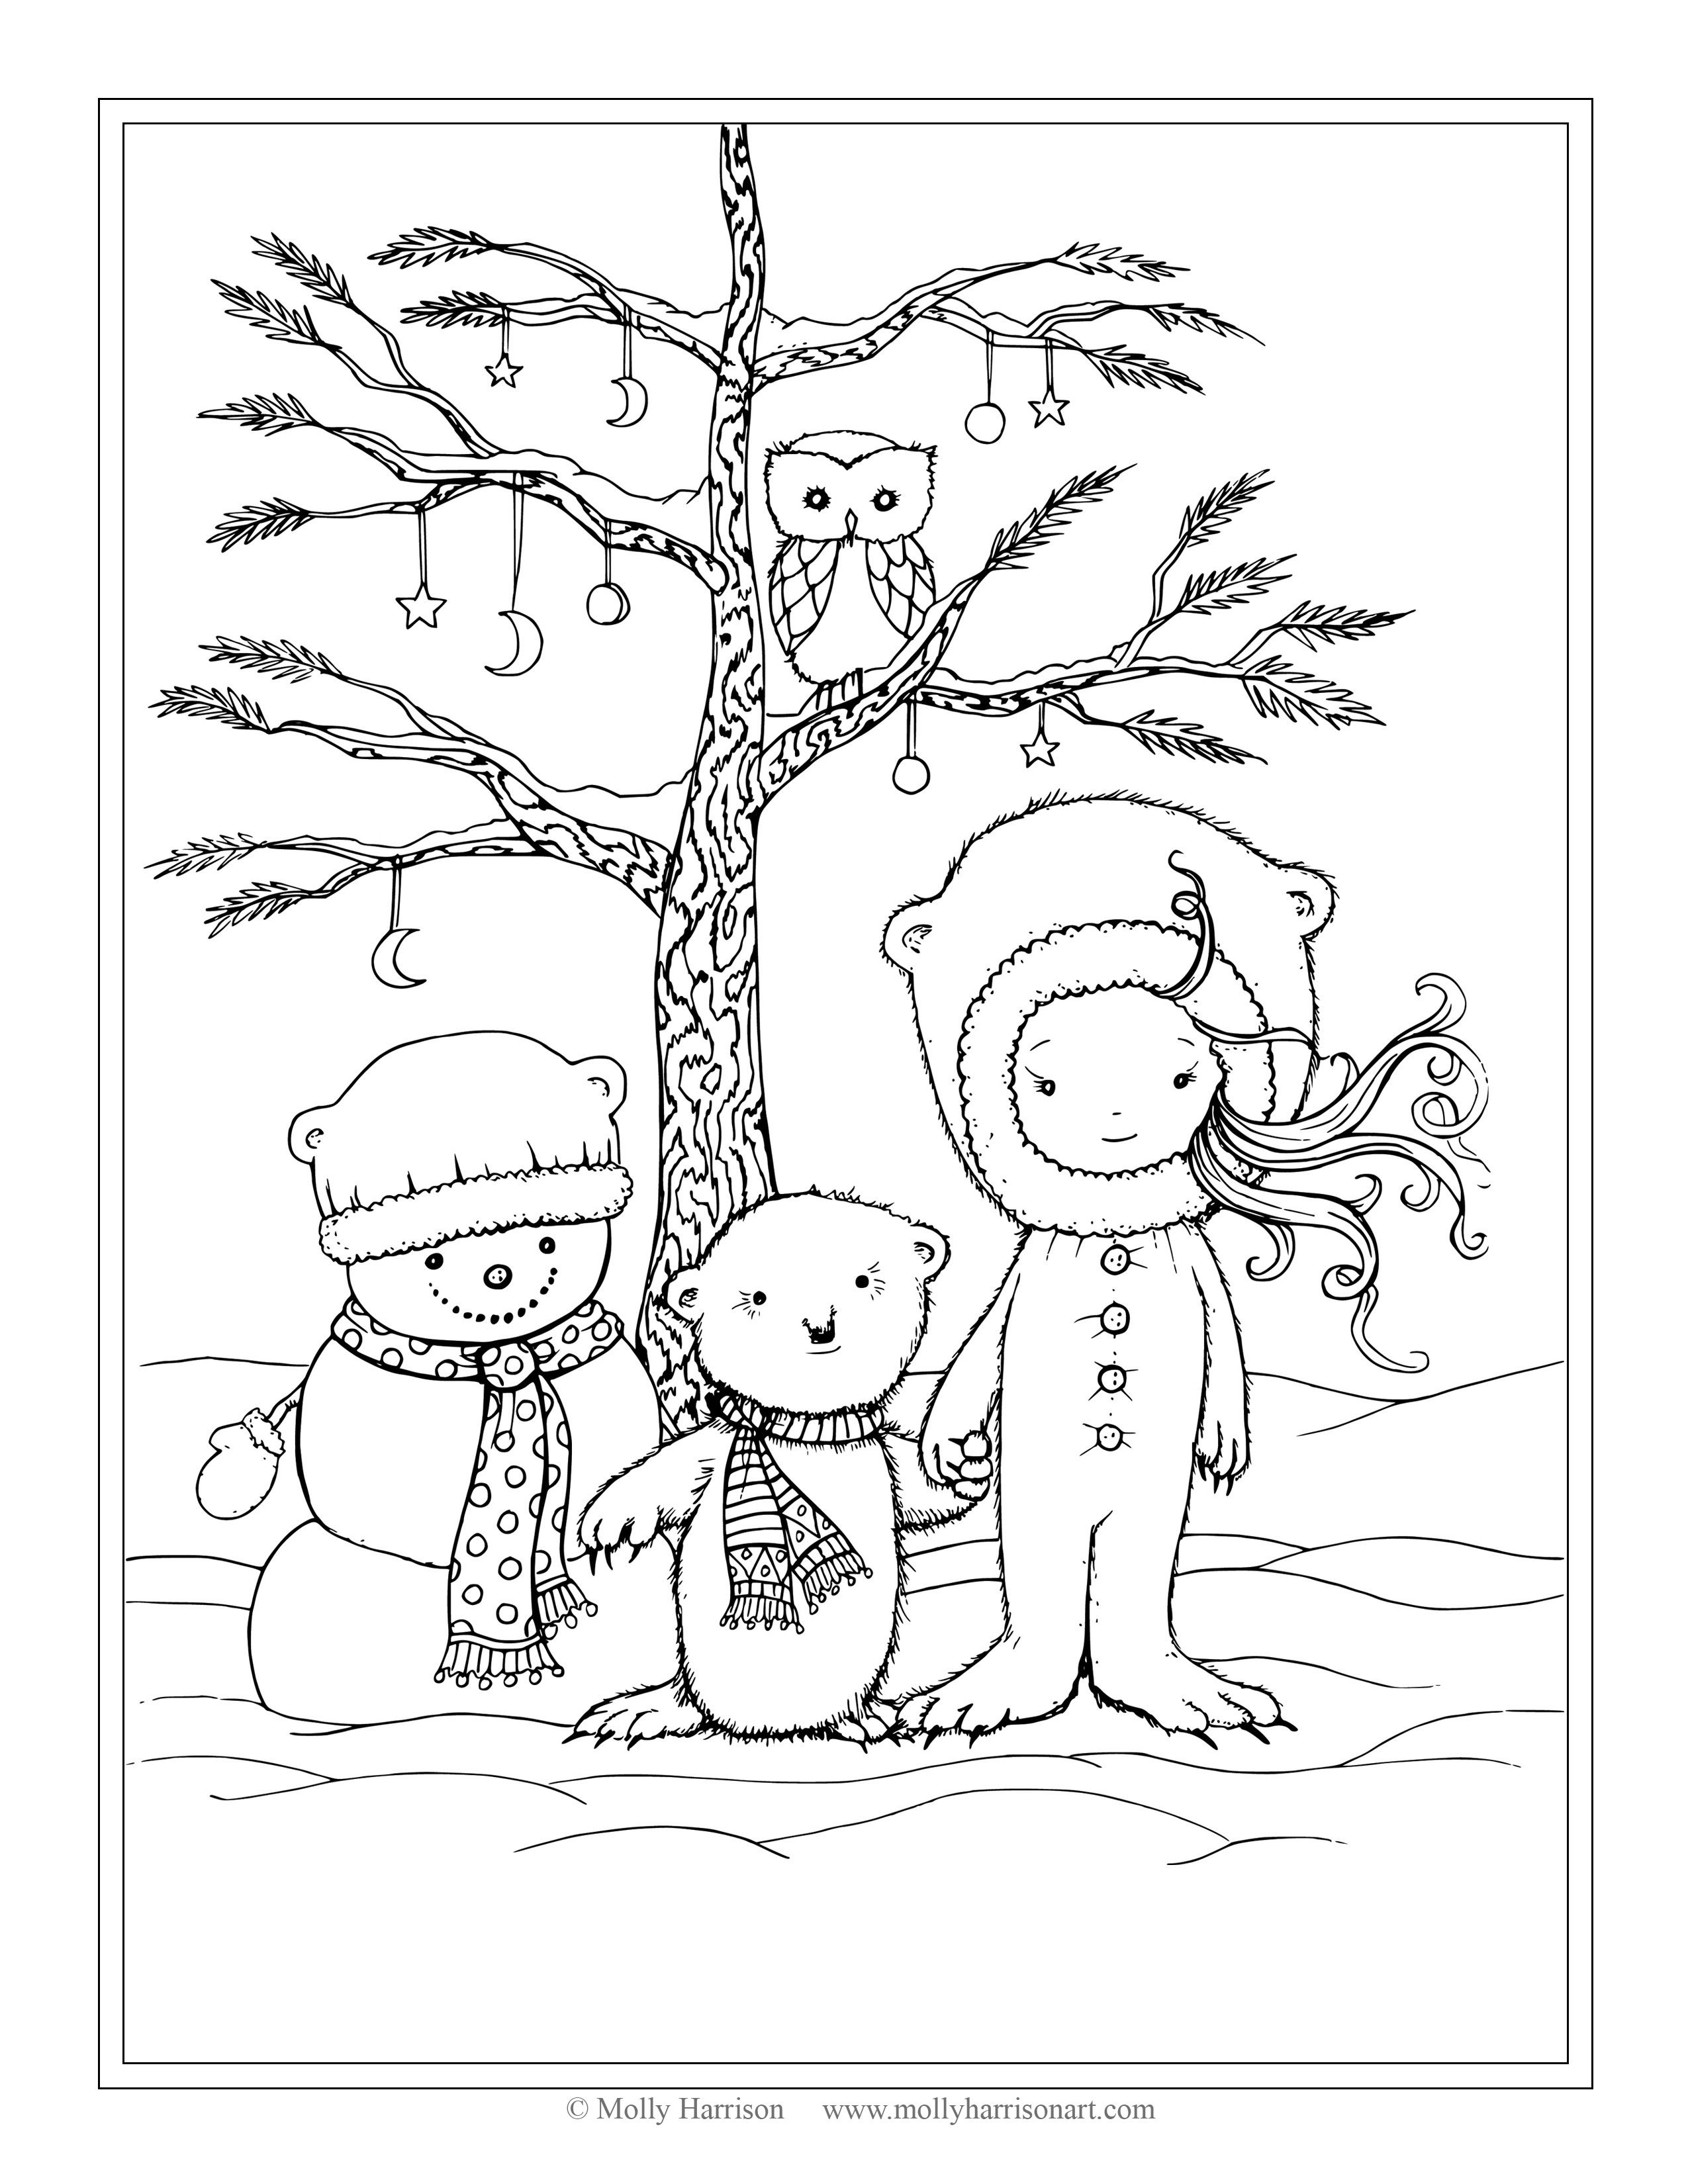 Polar Express Color Pages Free Polar Express Coloring Pages At Getcolorings Free